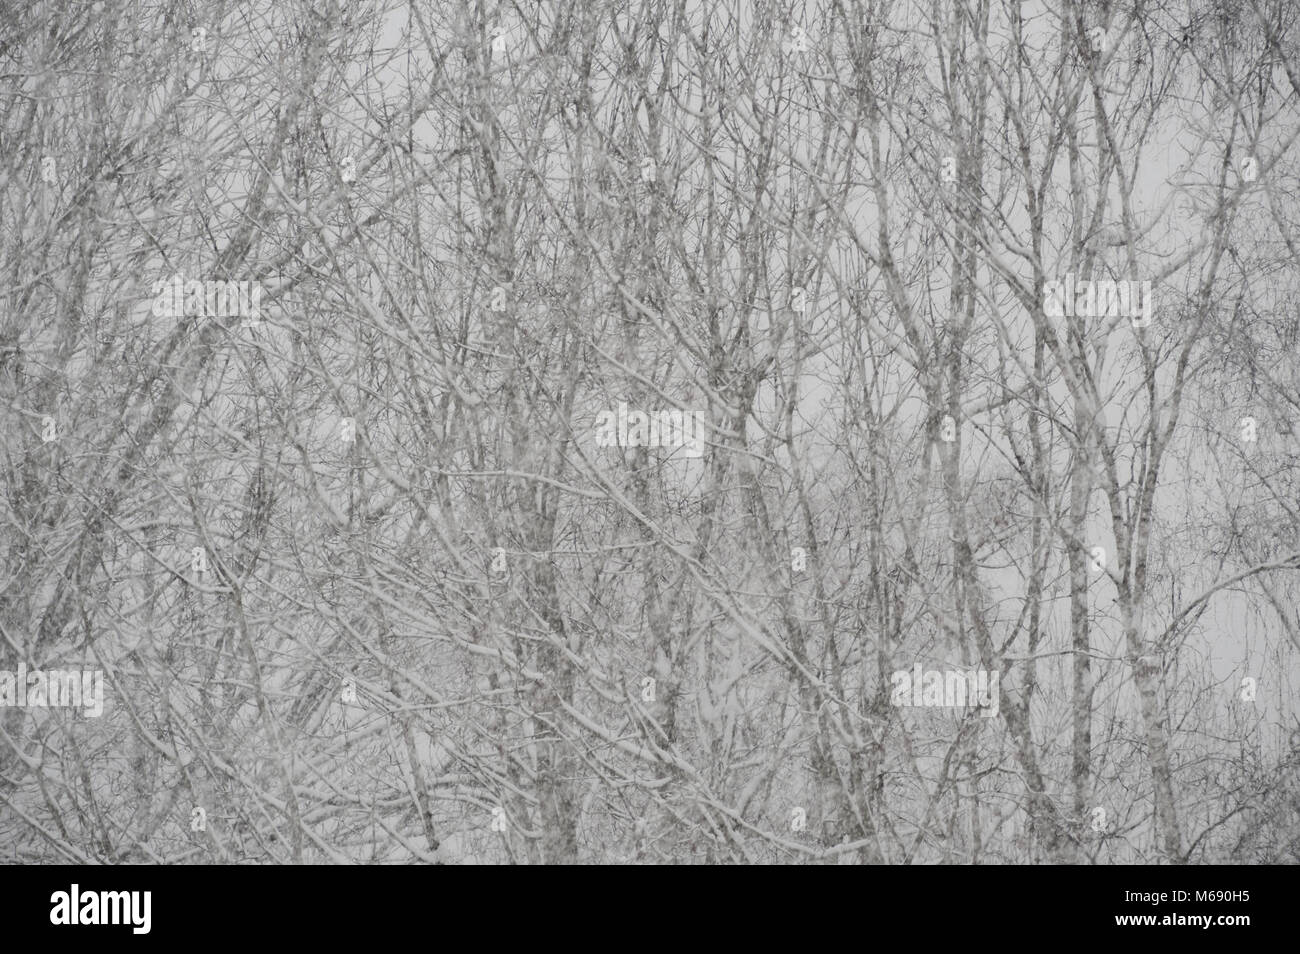 The beast from the East heavy dry snow falling in blizzard with ash, birch, maple, sycamore, trees in background almost obscured with blanket snowfall Stock Photo